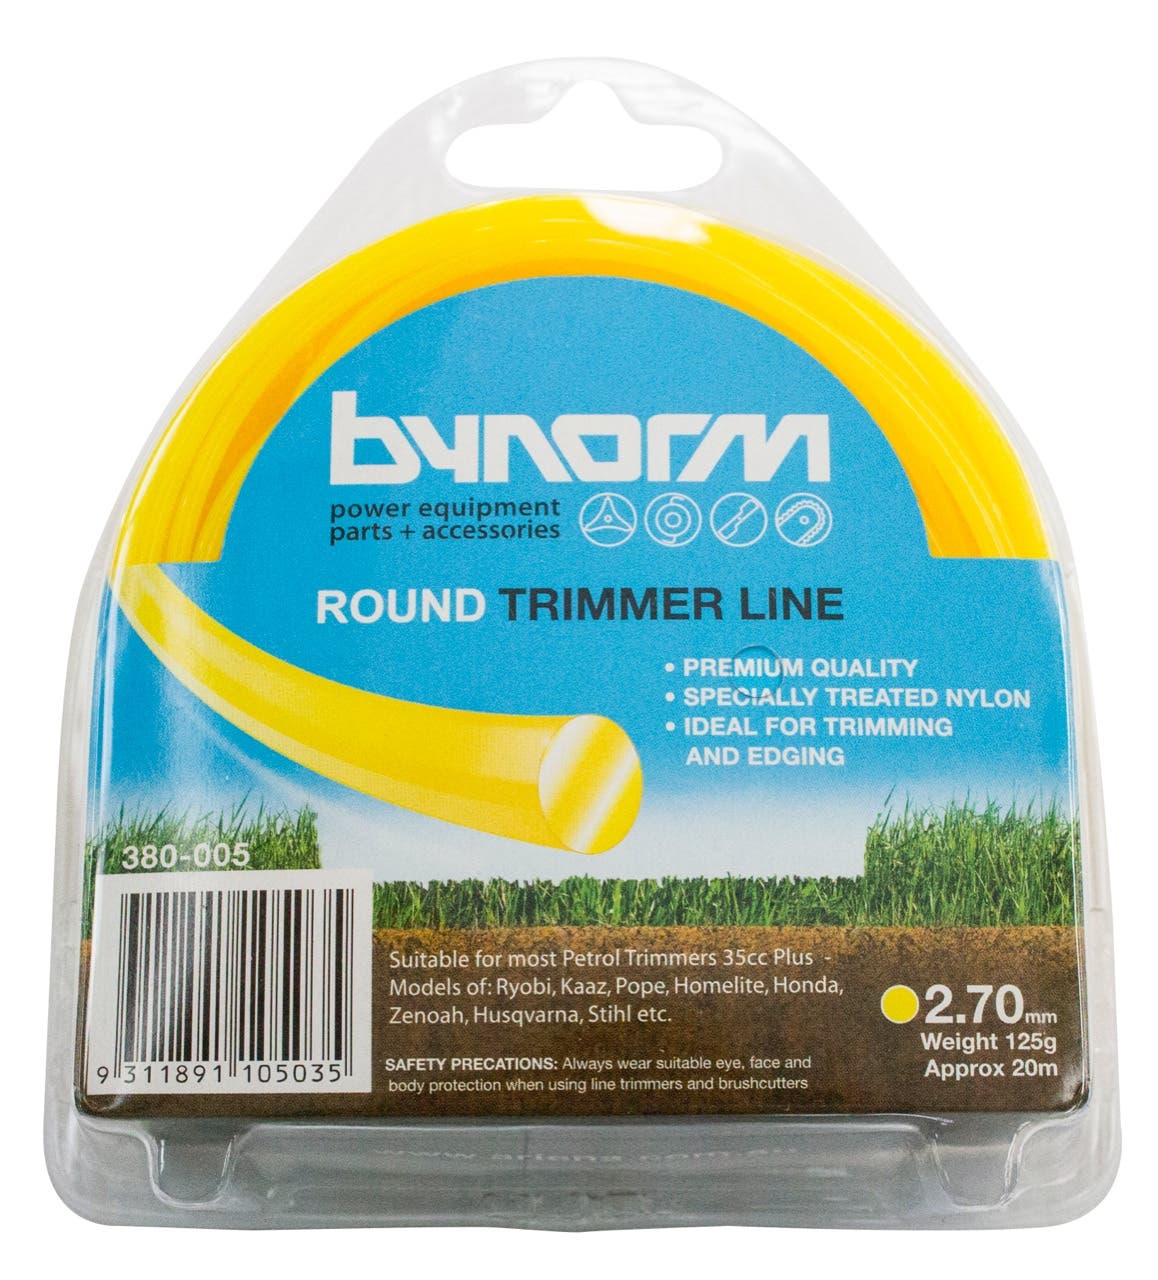 Bynorm Round Trimmer Line Yellow 125g 2.7mm